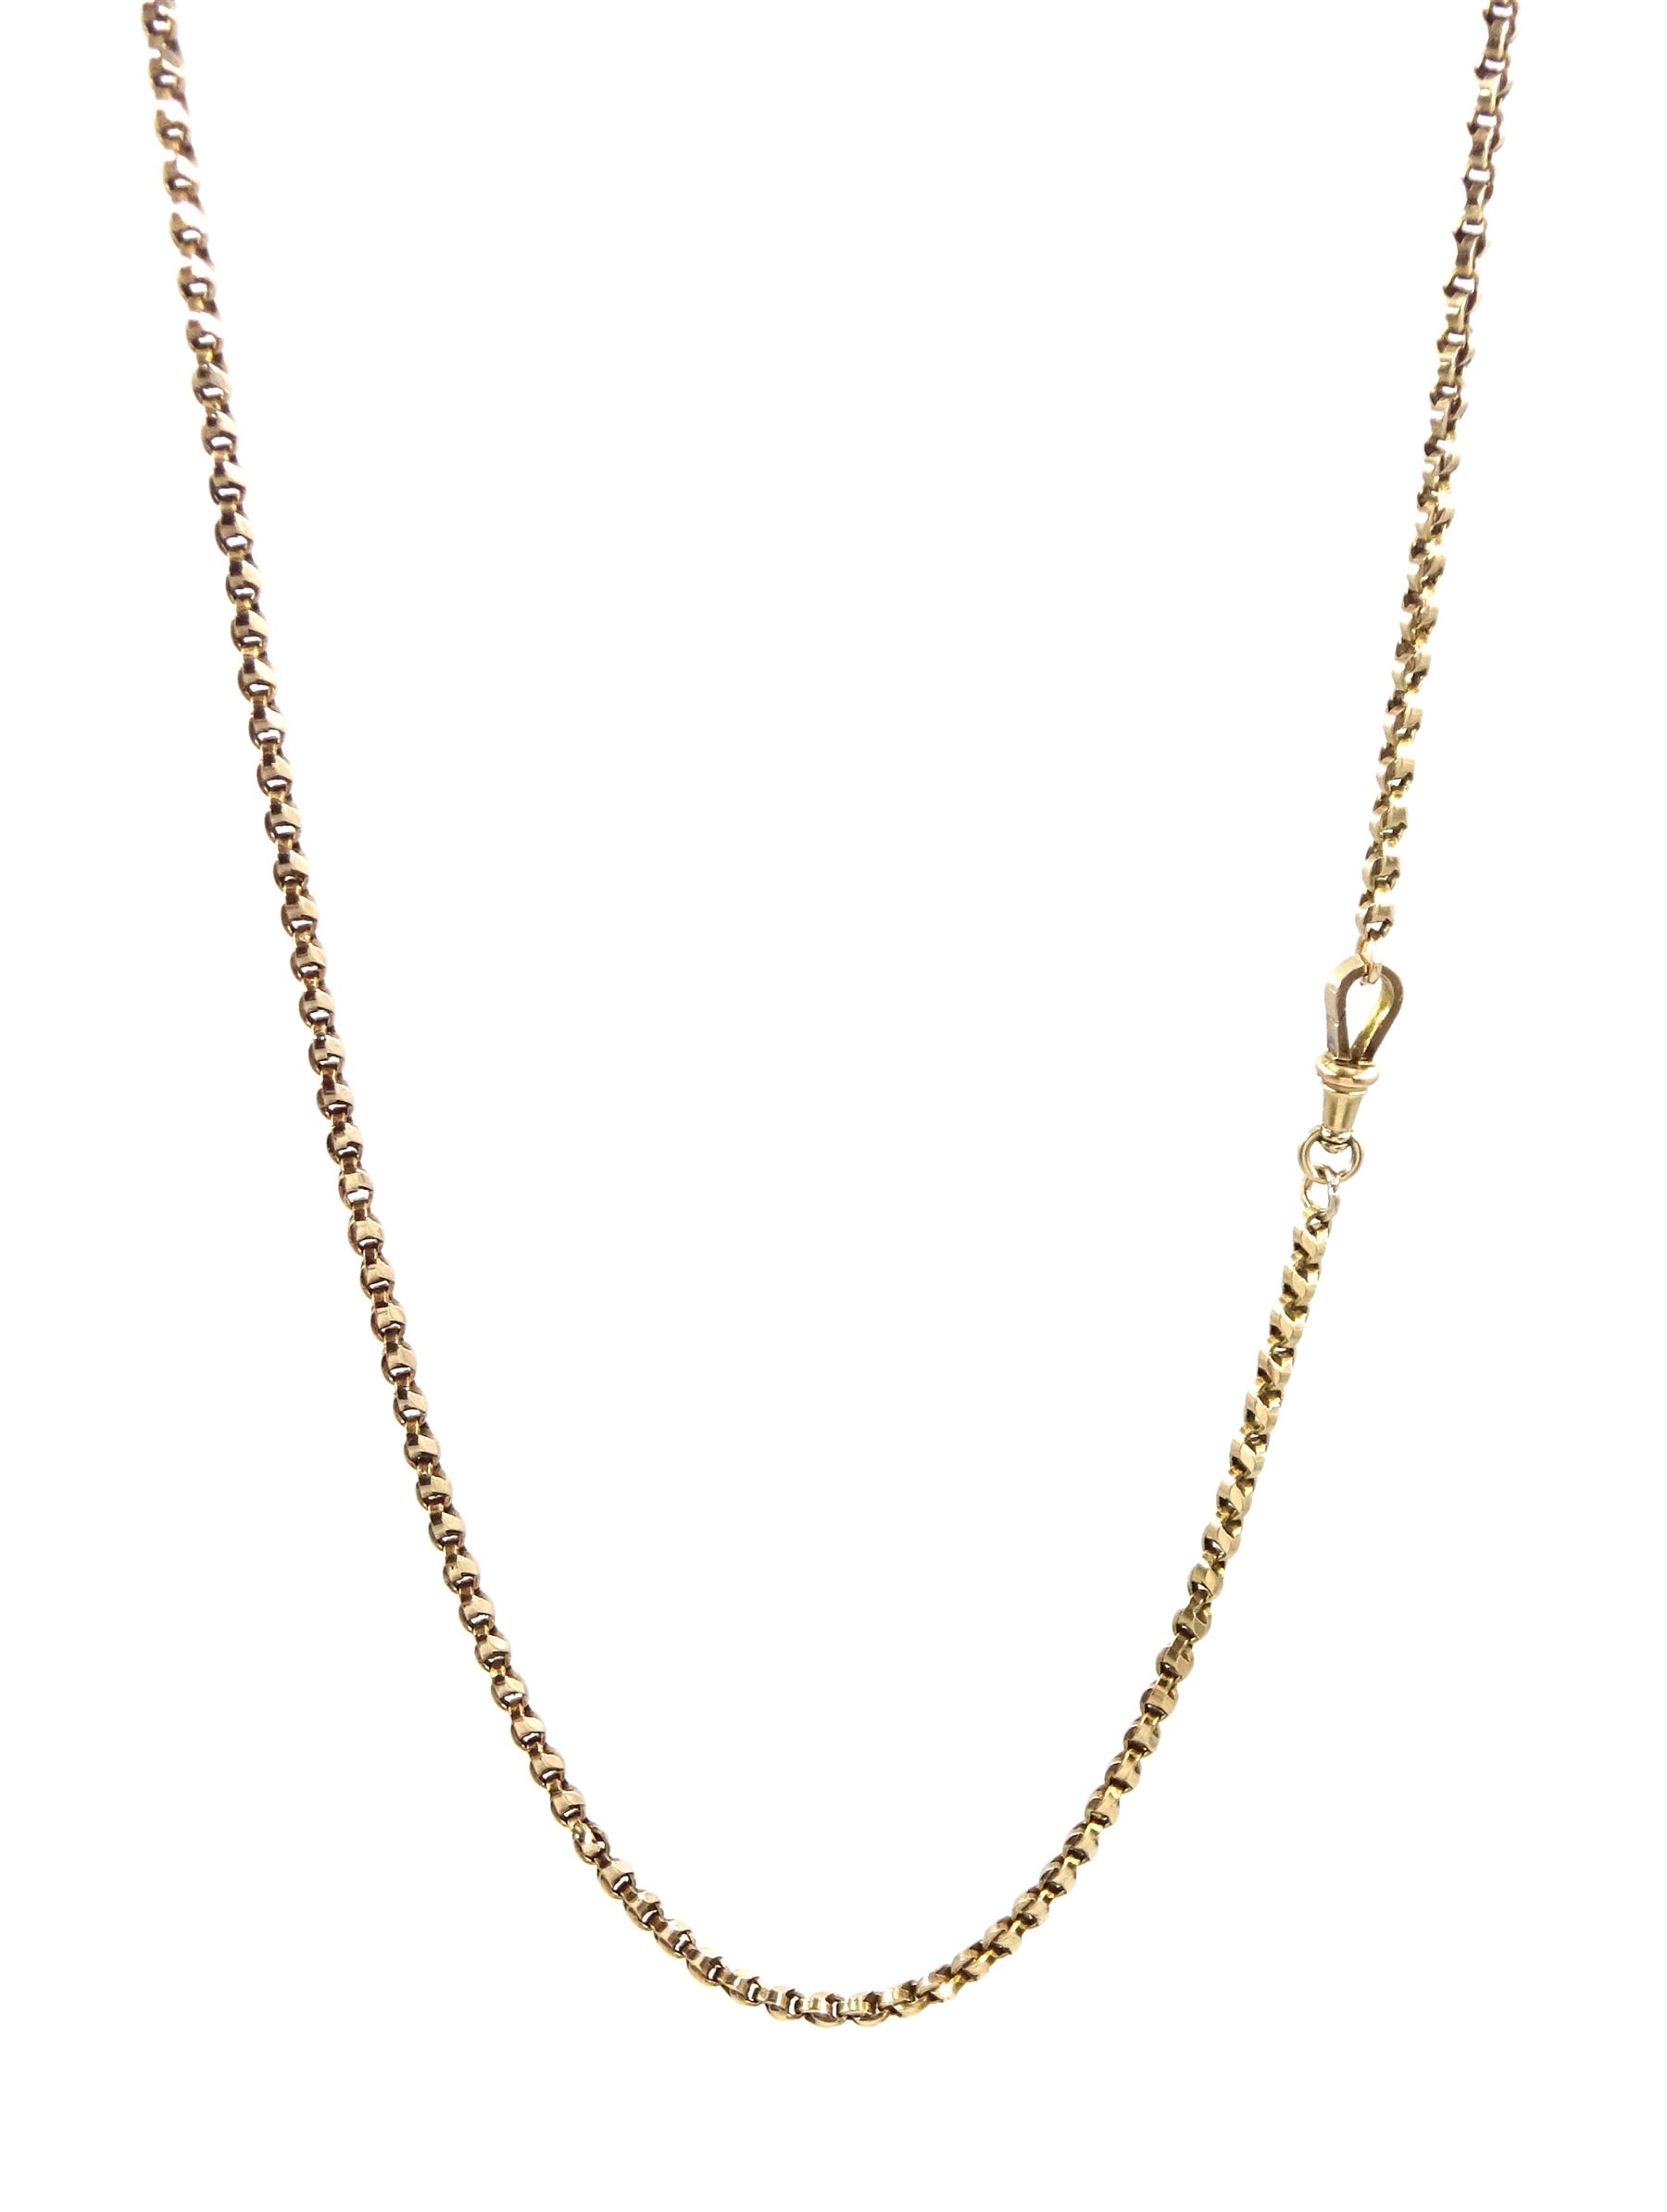 Early 20th century 9ct gold link chain with clip